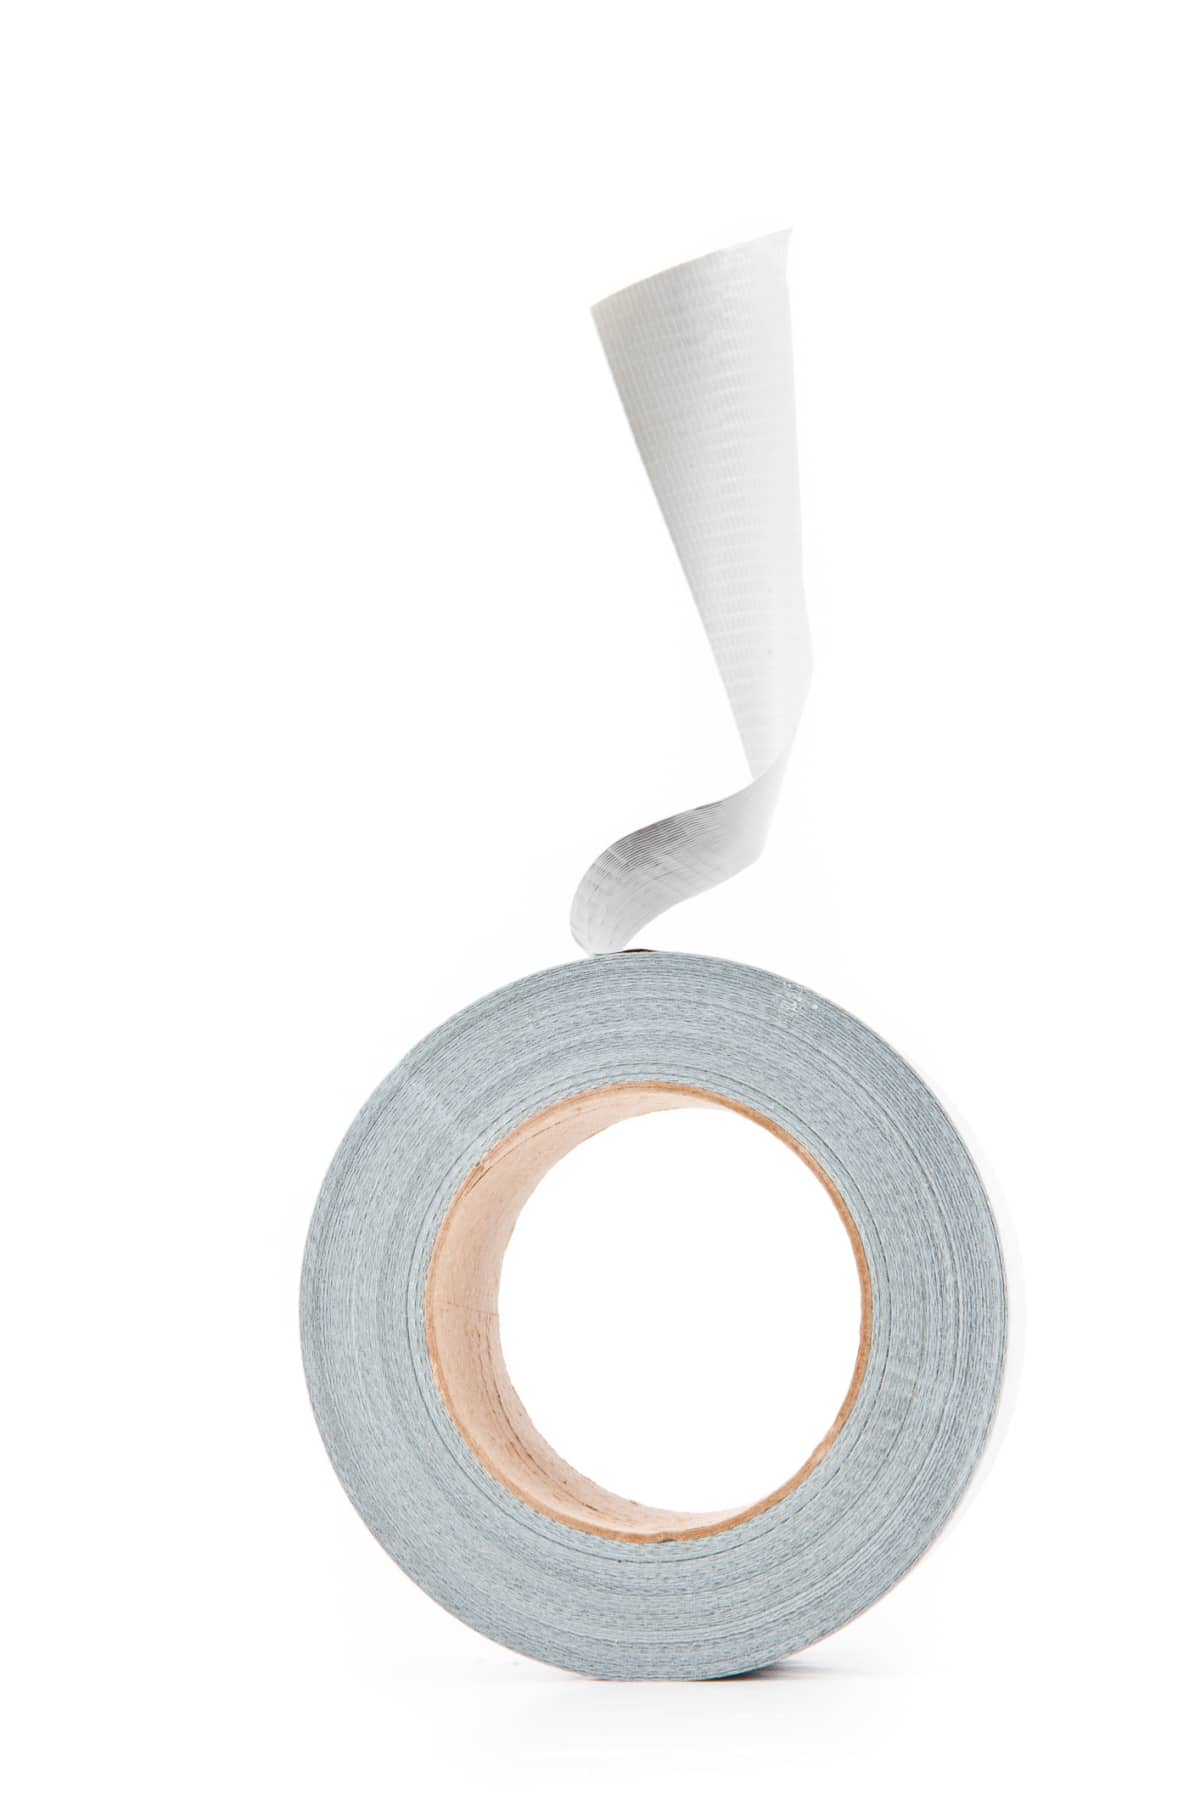 A roll of silver duct tape.